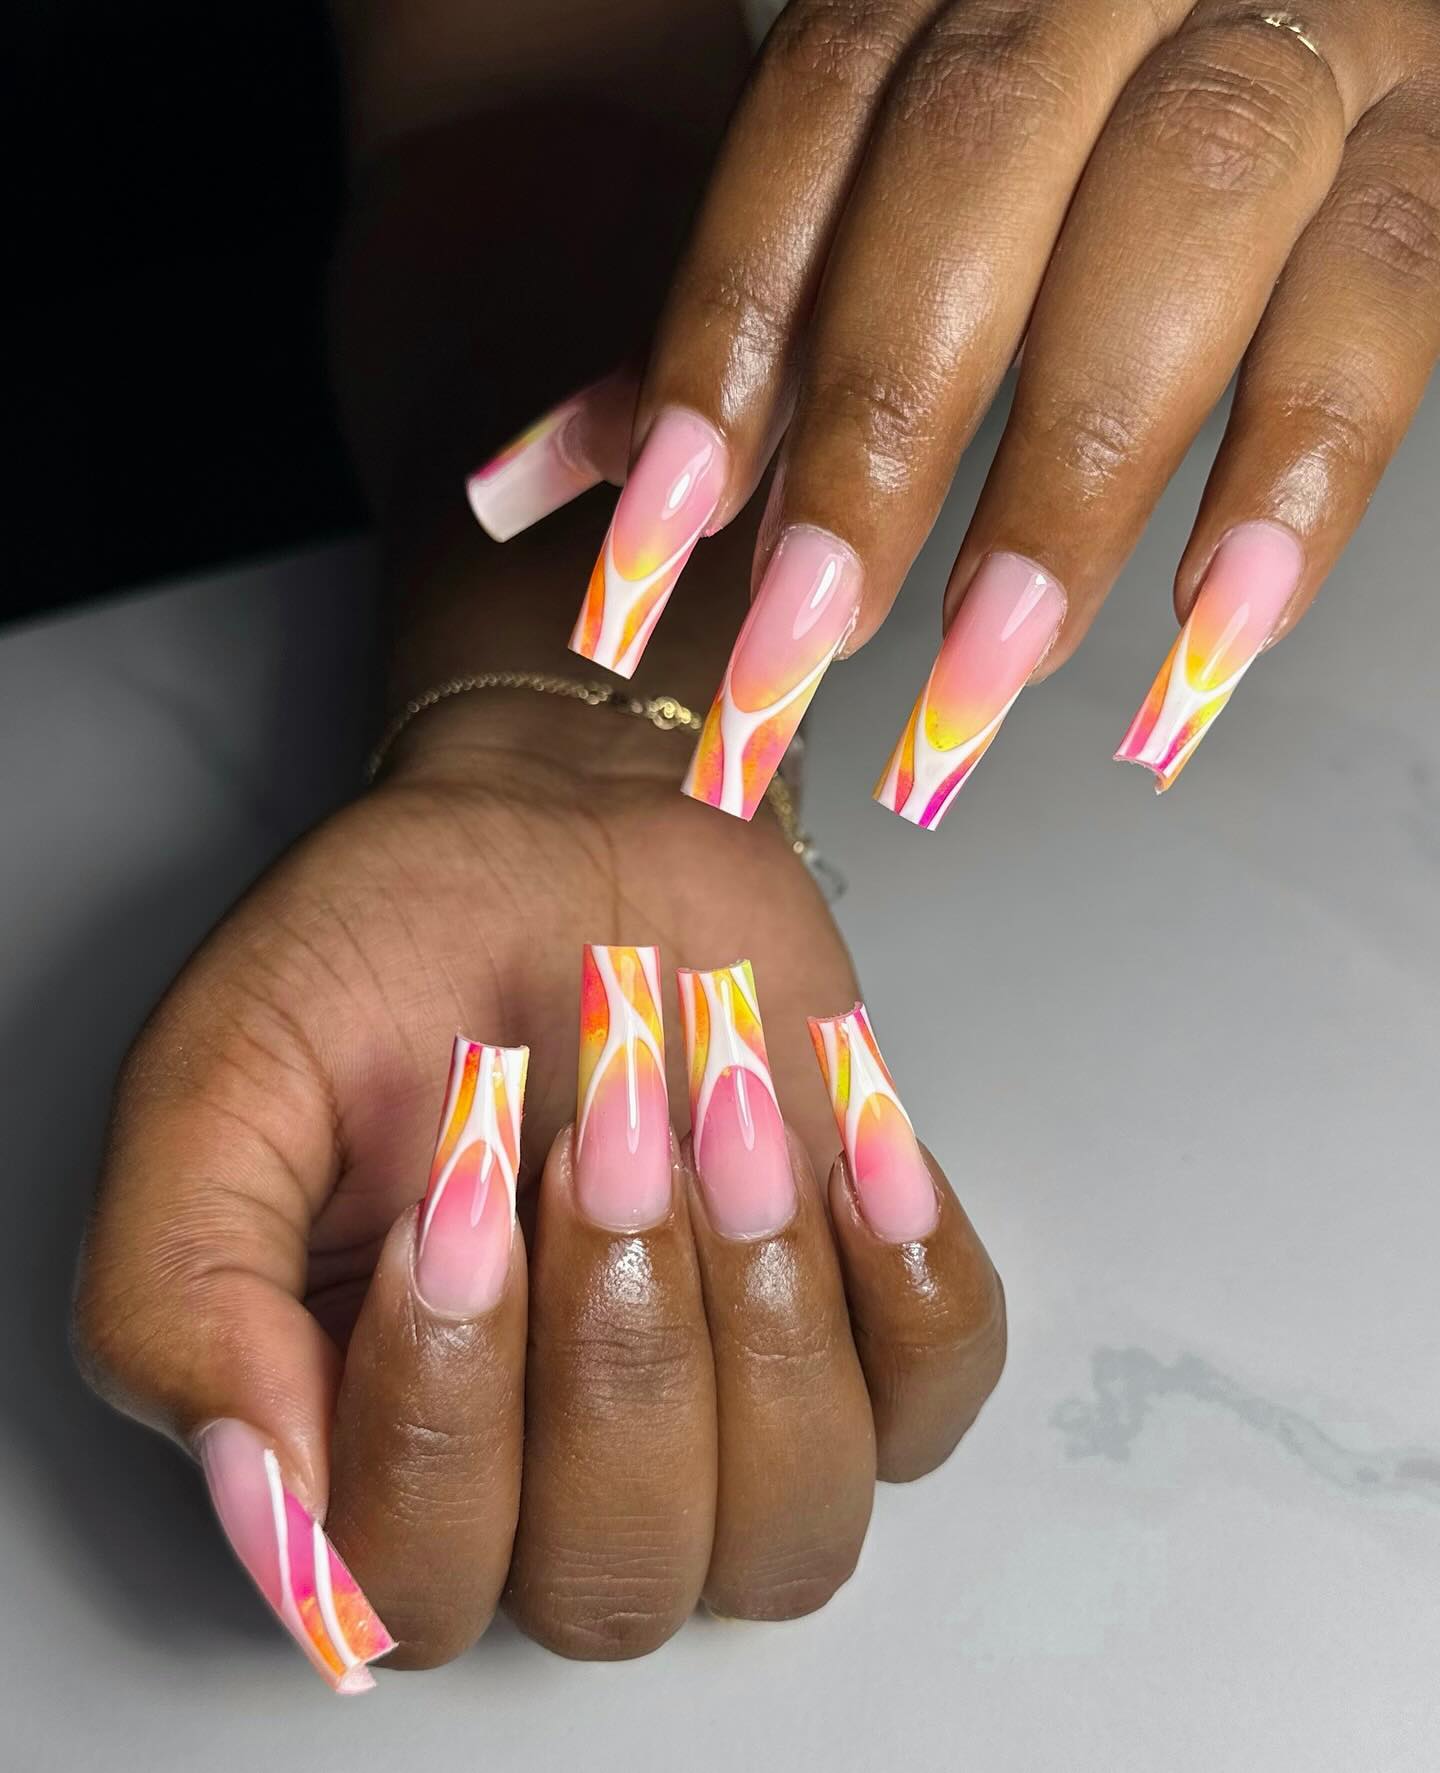 Summer Vibes with Pink to Yellow Ombre and Swirls